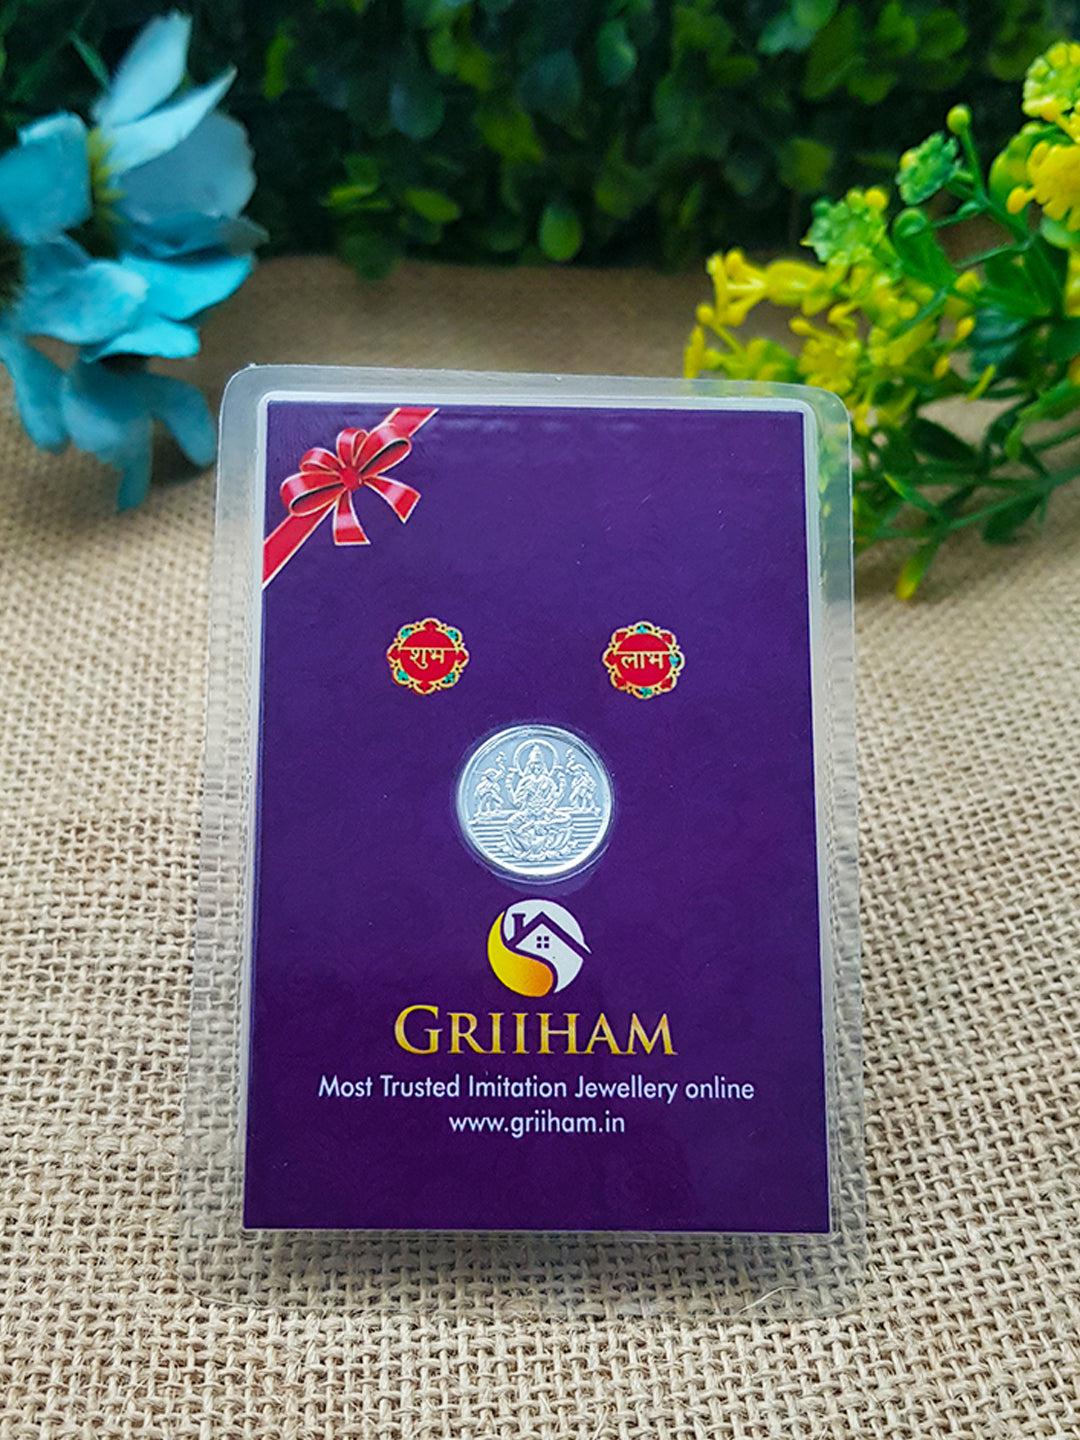 Griiham Pure Silver coin 999 Purity 1 gram-Collectible Coins & Currency-Griiham-Griiham